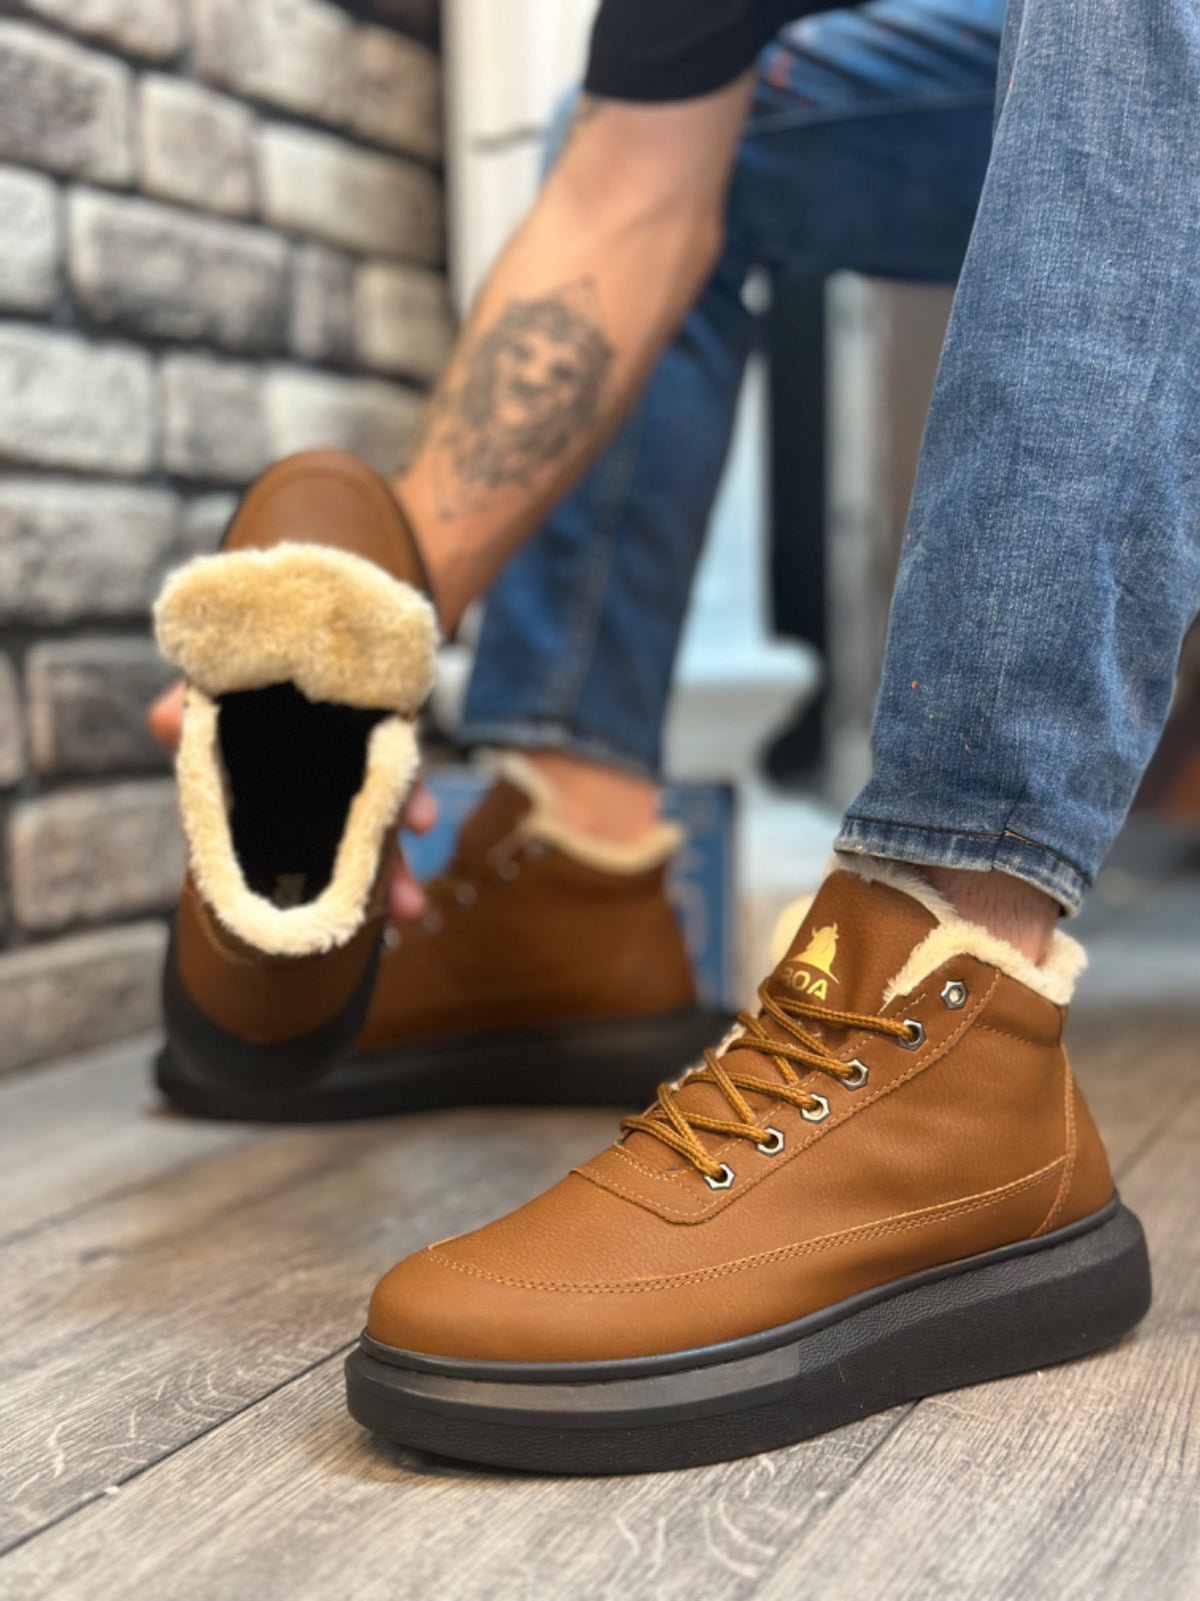 BA0151 Light Brown Men's Style Sports Boots with Fur Inside and Laces - STREETMODE™